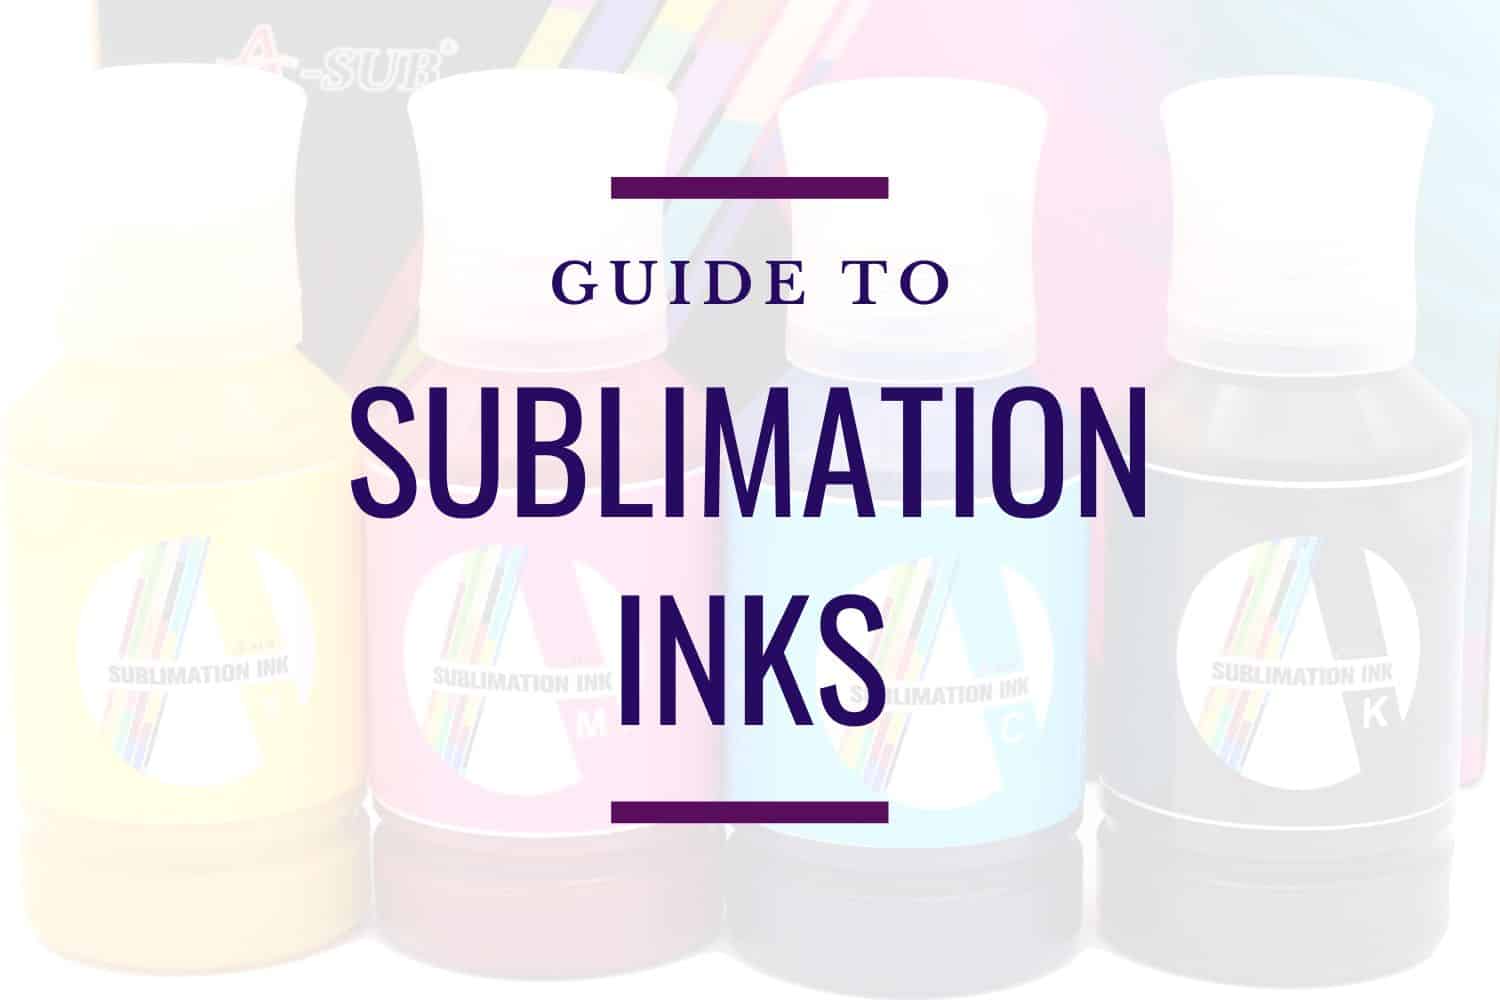 Hiipoo Sublimation Paper and Ink Review - Sublimation Tutorial